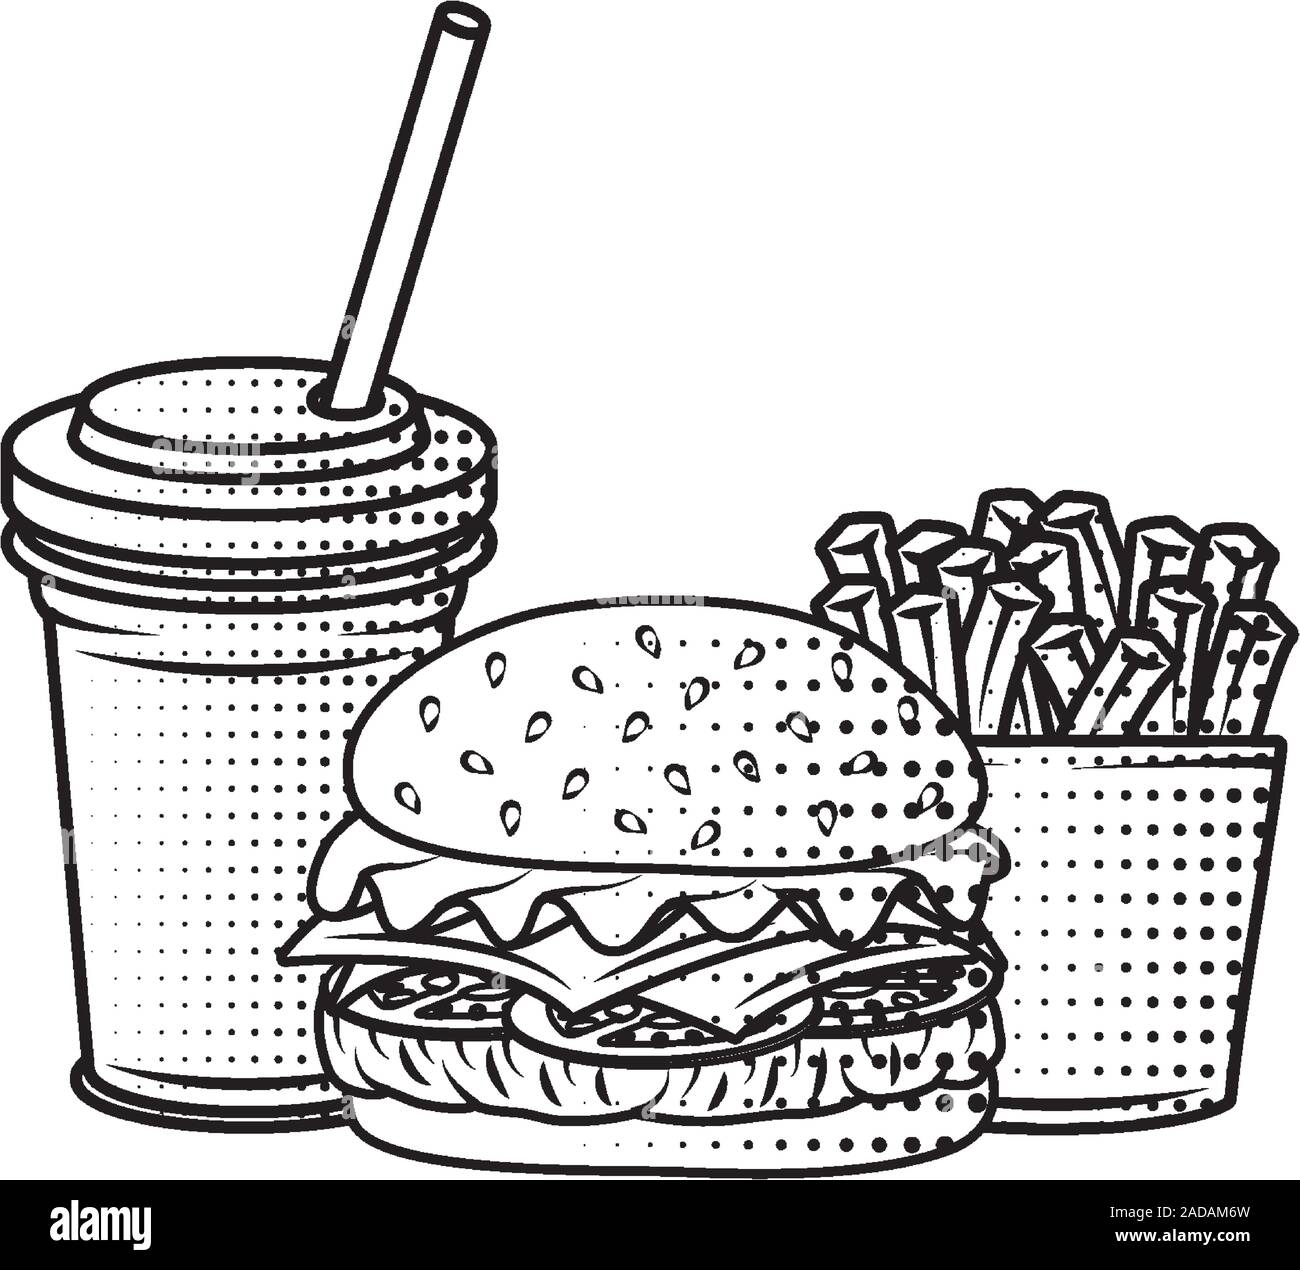 Page 2 Burger Fries Soda High Resolution Stock Photography And Images Alamy